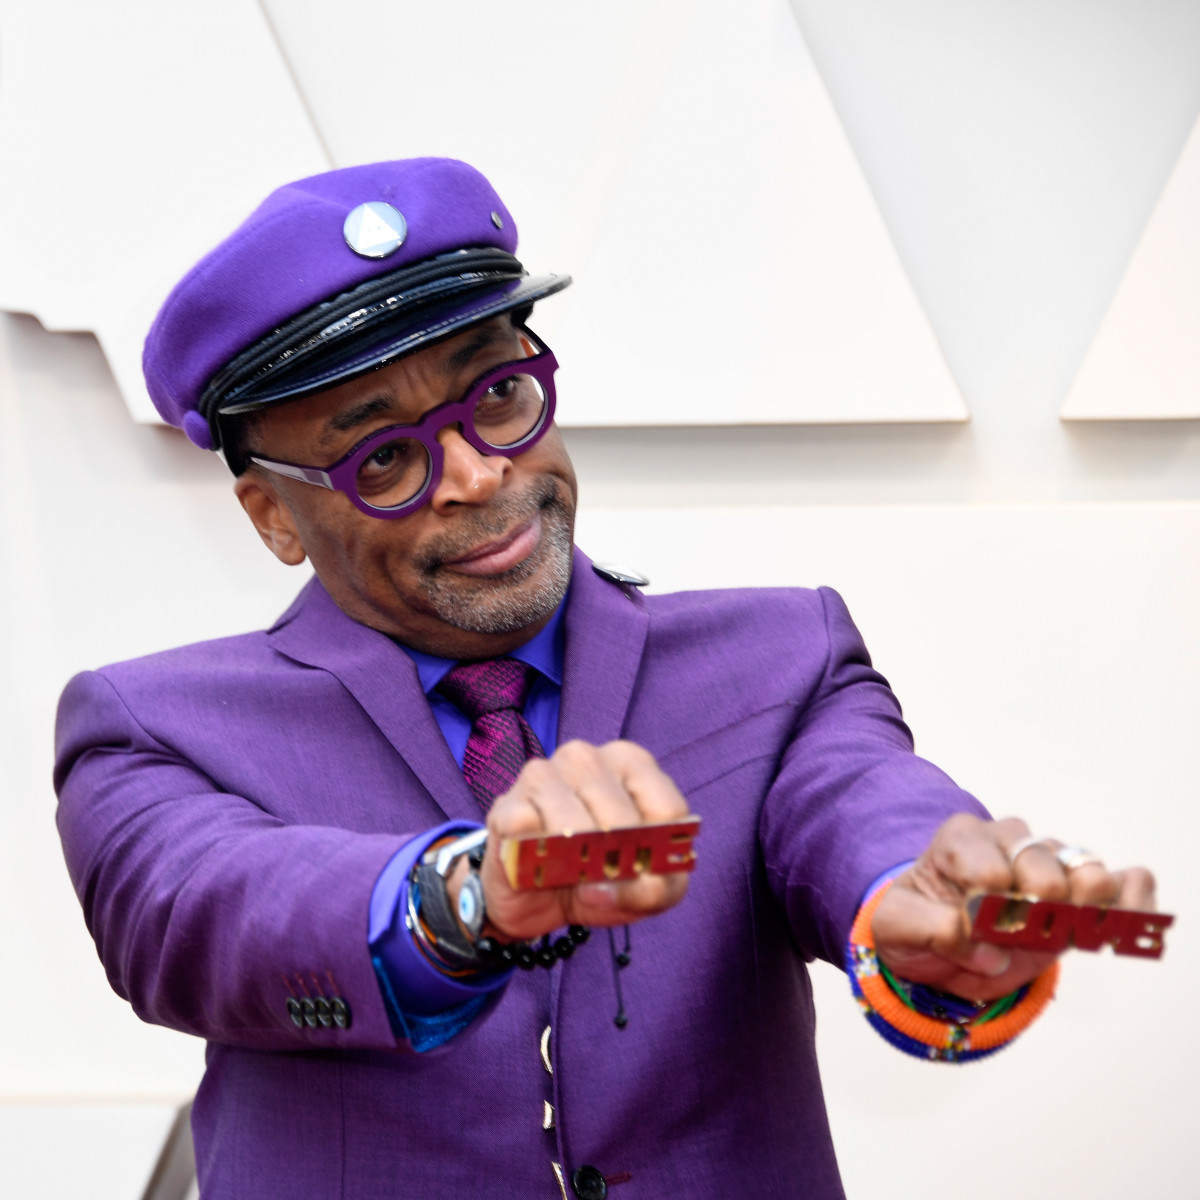 Spike Lee, director of BlacKkKlansman, attends the 91st Annual Academy Awards on February 24th, 2019, wearing the "Love" and "Hate" rings from his 1990 film, Do the Right Thing.